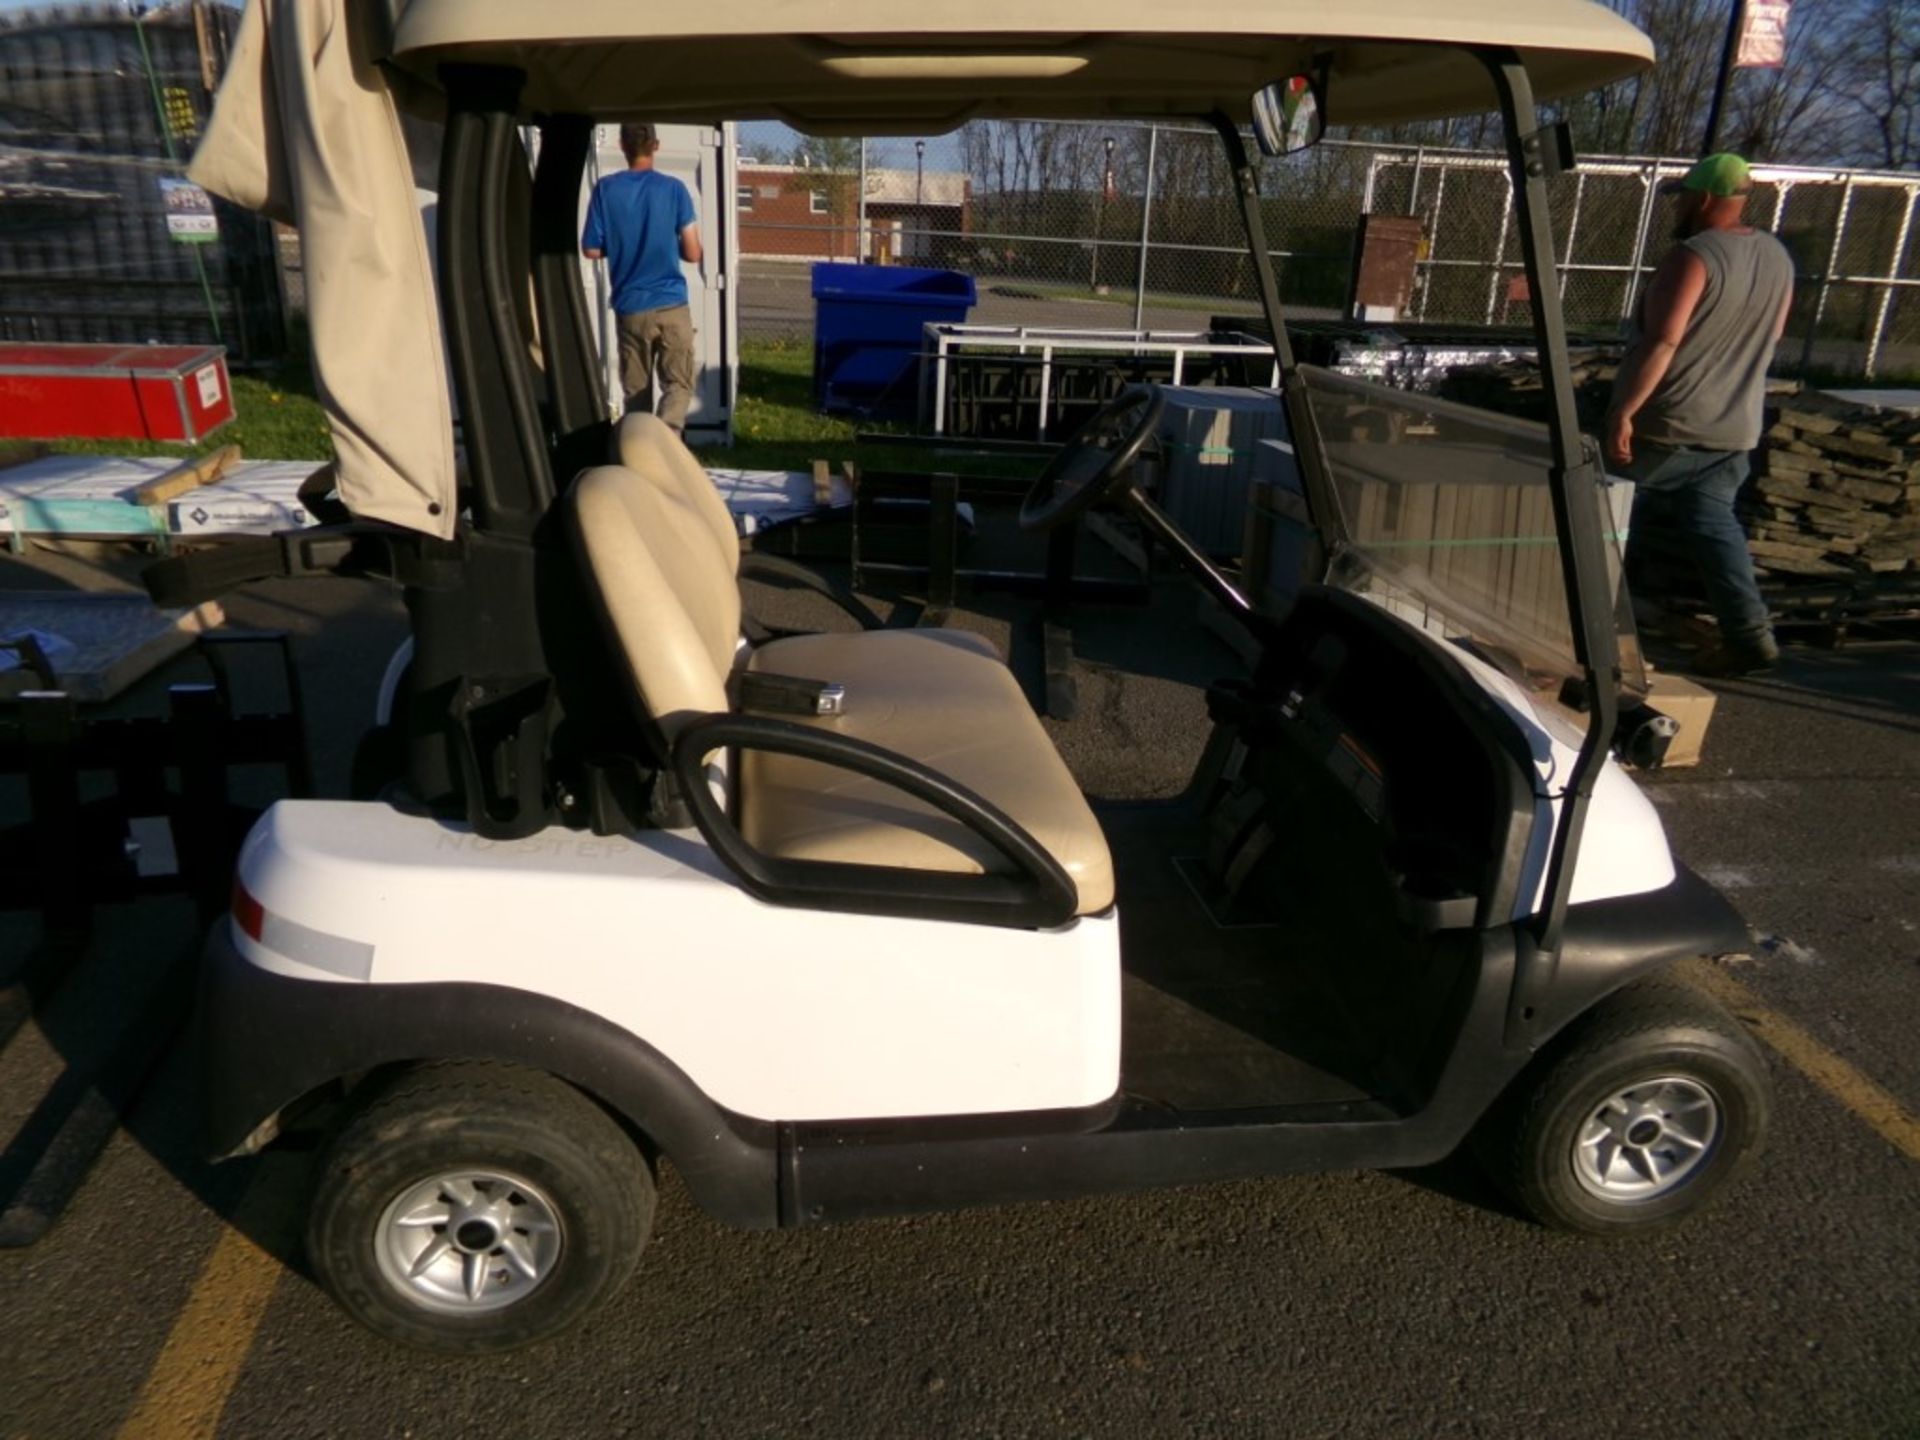 White Club Car Electric Golf Cart, Canopy, Windshield, Bag Holder, Charger Under the Seat (5165) - Image 2 of 2